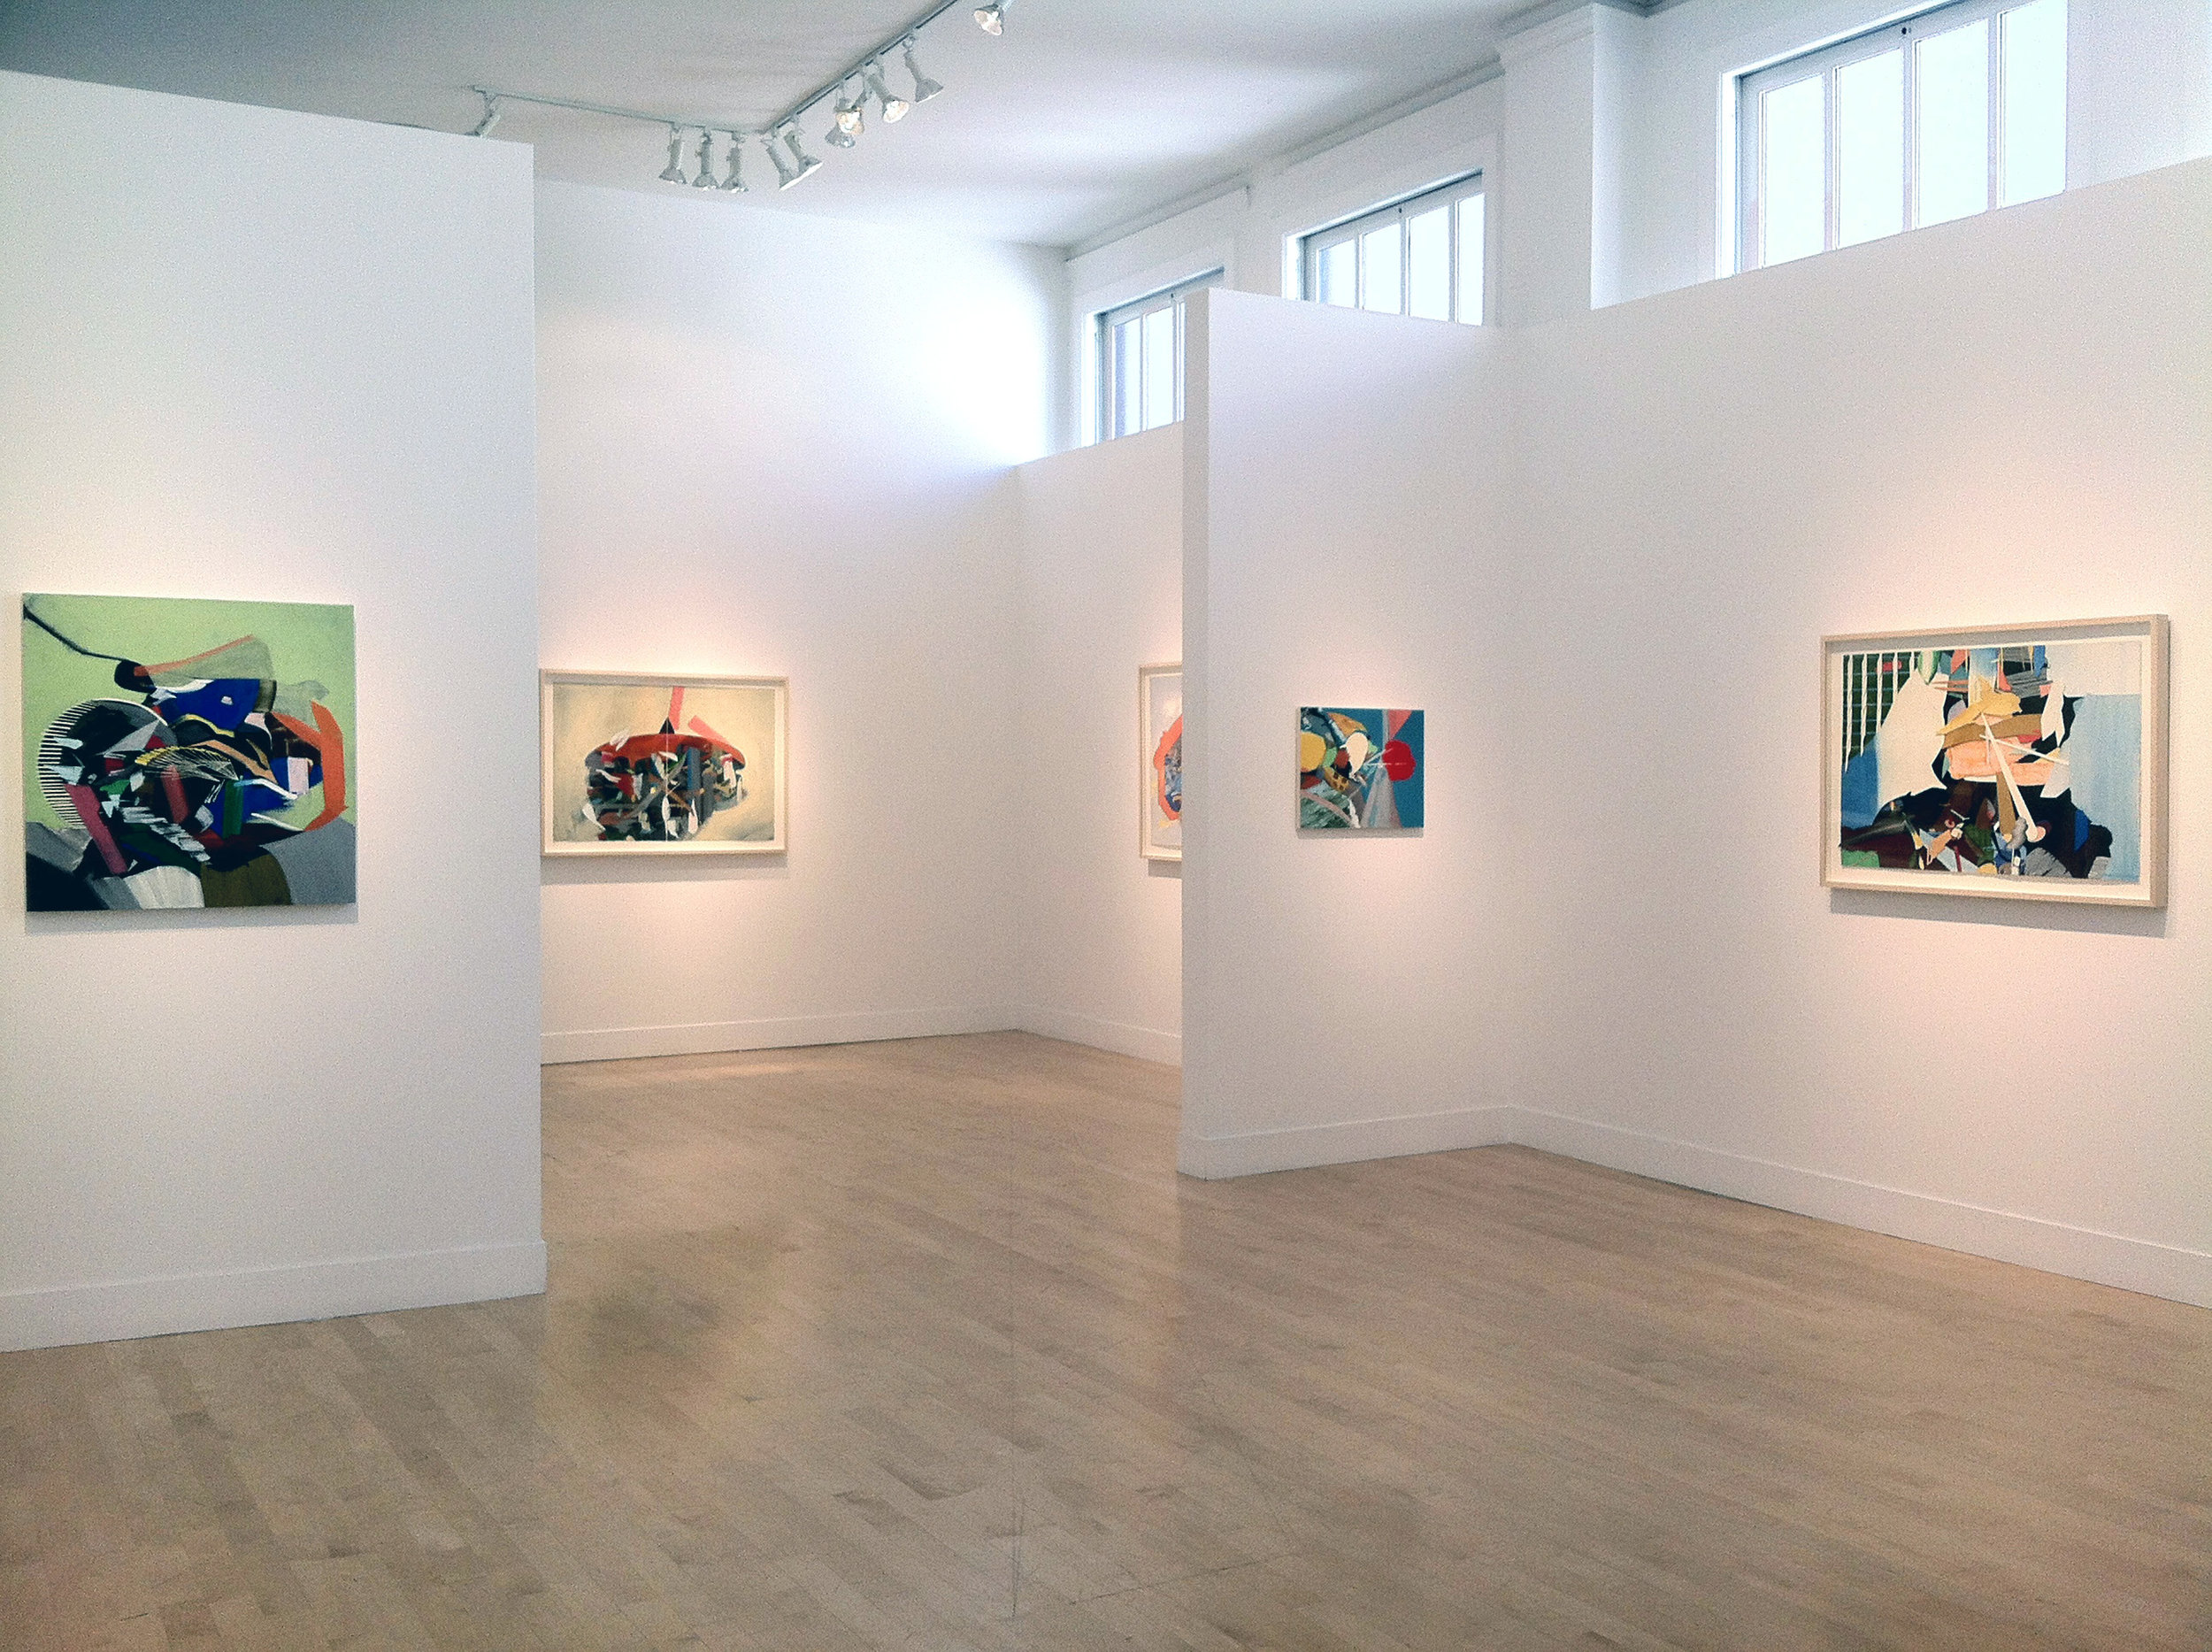  Installation view, “Skipping Over Damaged Area,” Gregory Lind Gallery, San Francisco, 2012 